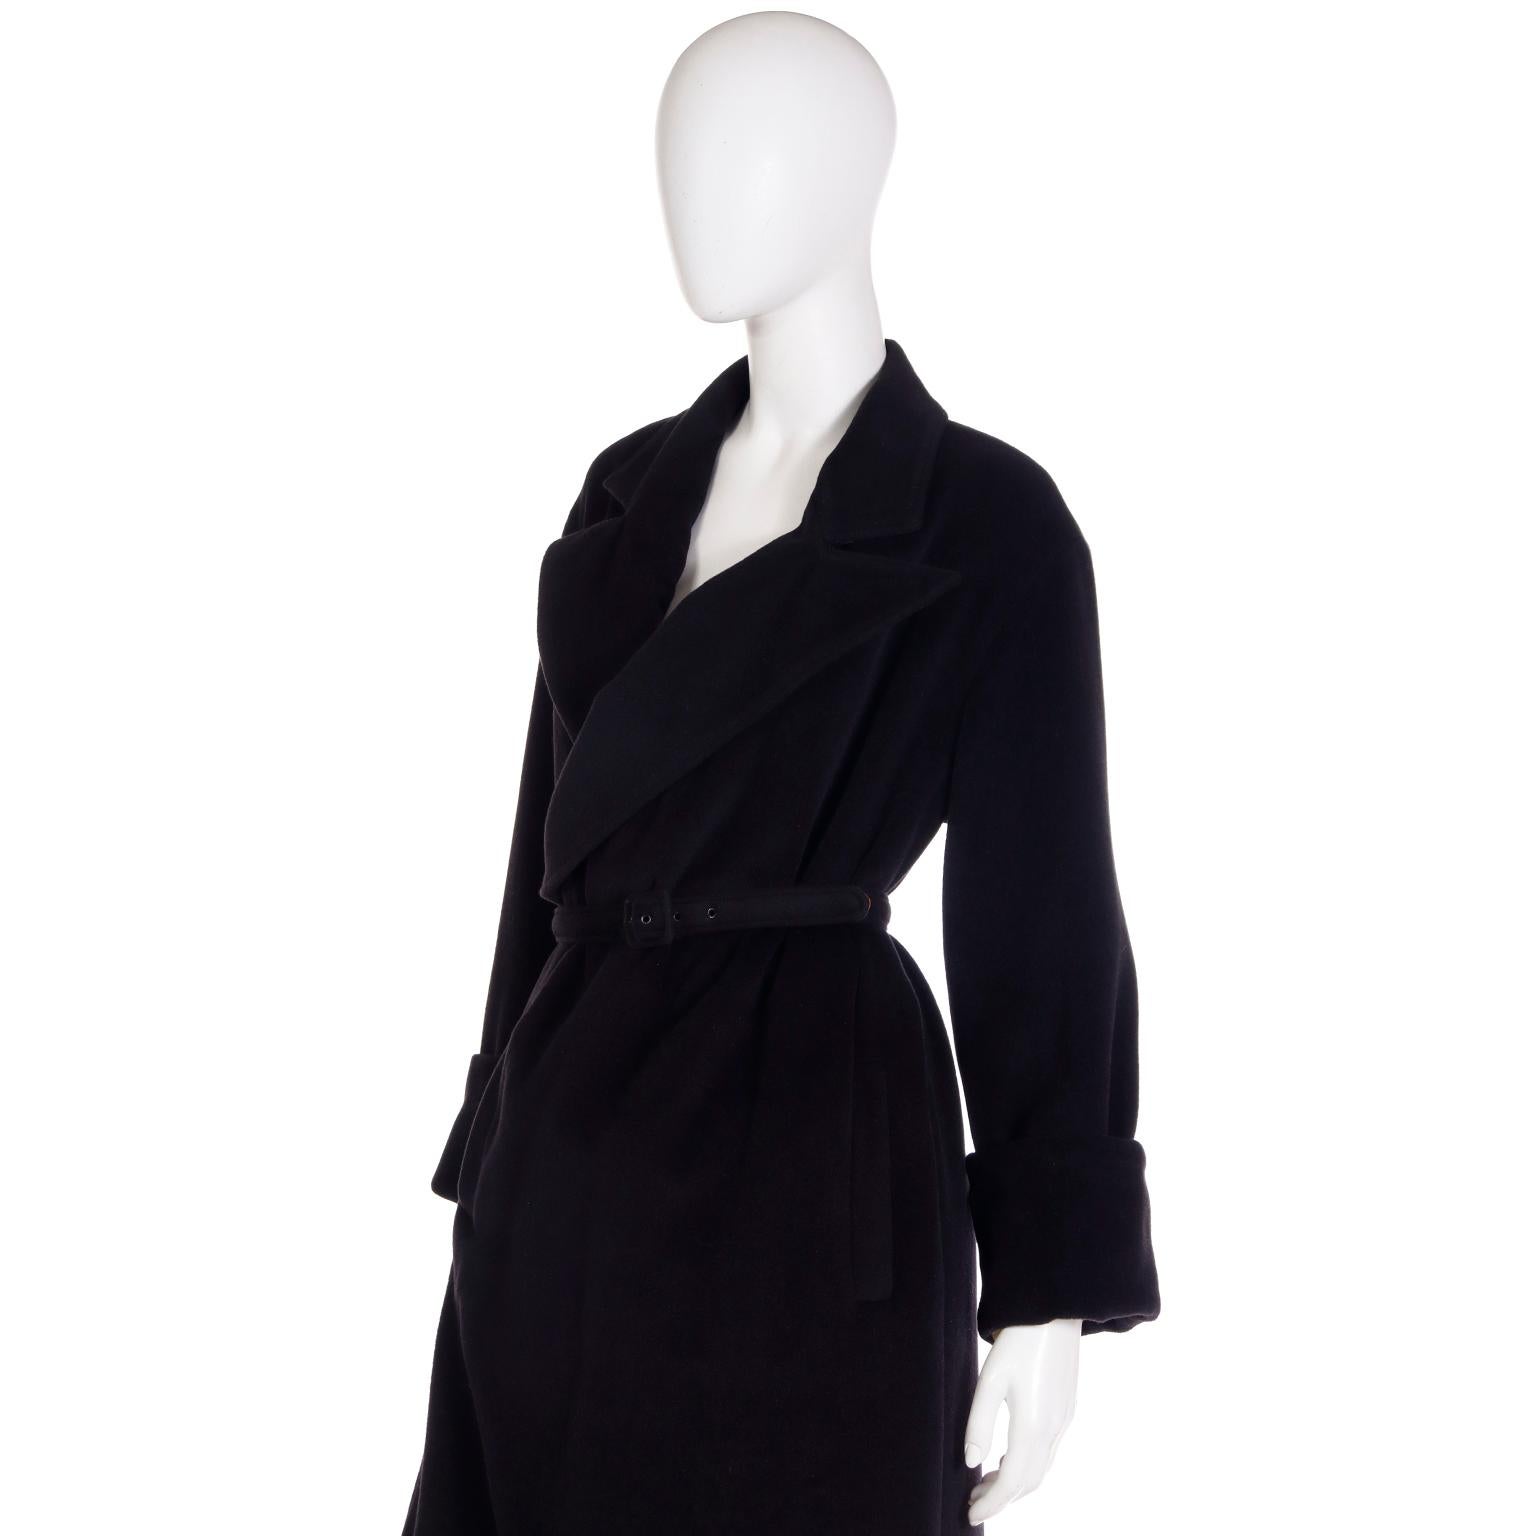 F/W 2000 Jean Paul Gaultier Black Angora Wool Coat with Belt & Signature LIning For Sale 2